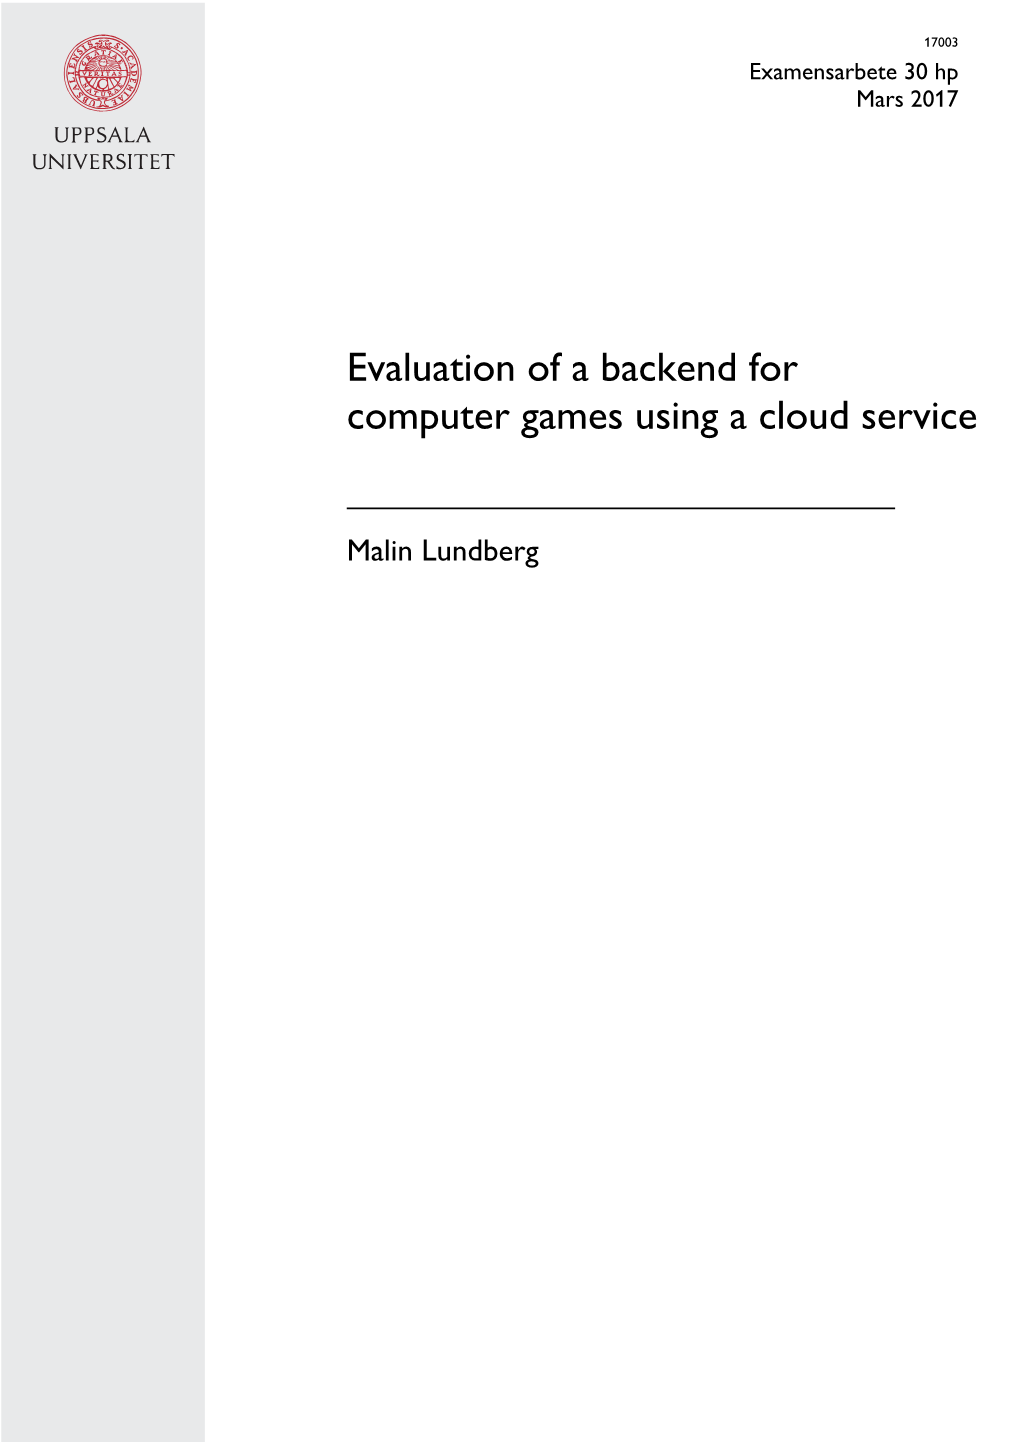 Evaluation of a Backend for Computer Games Using a Cloud Service